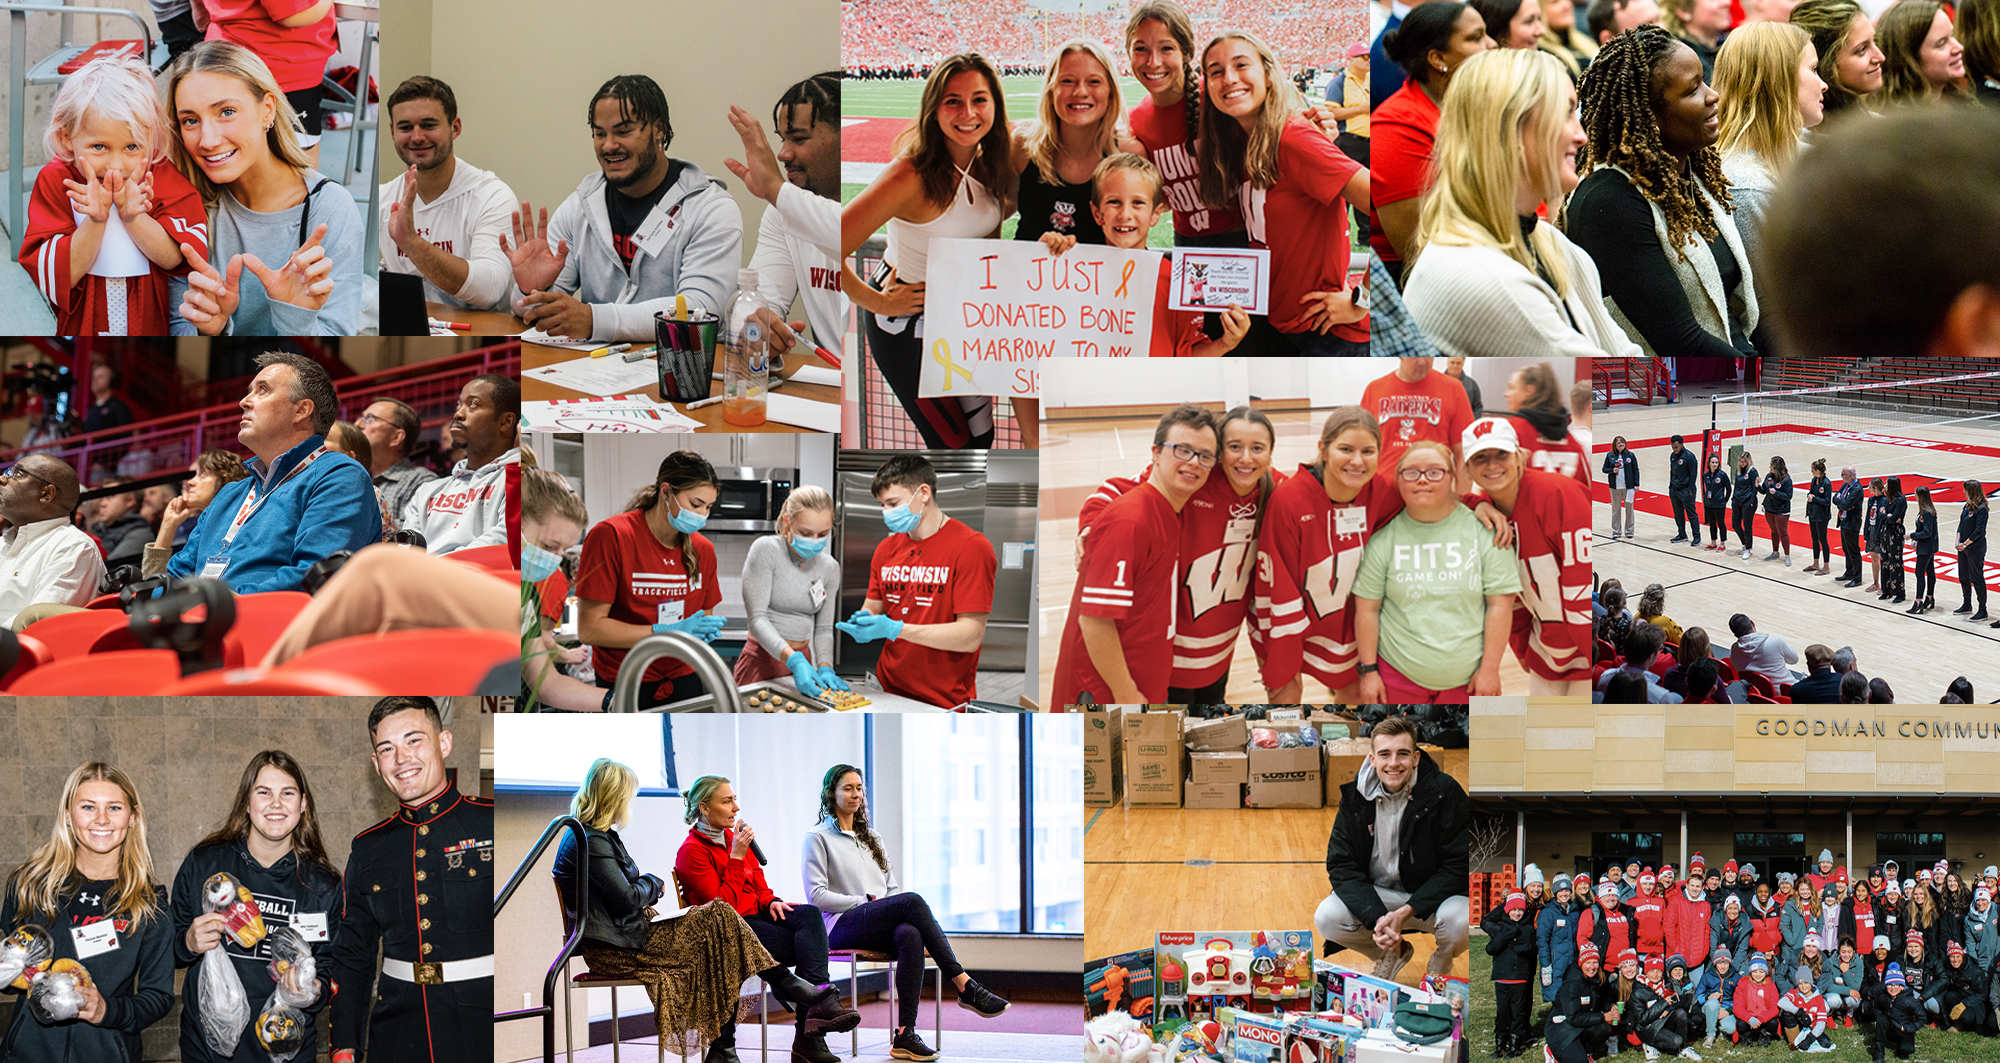 A collage of sudent athletes, badger fans, and volunteers participating in community events